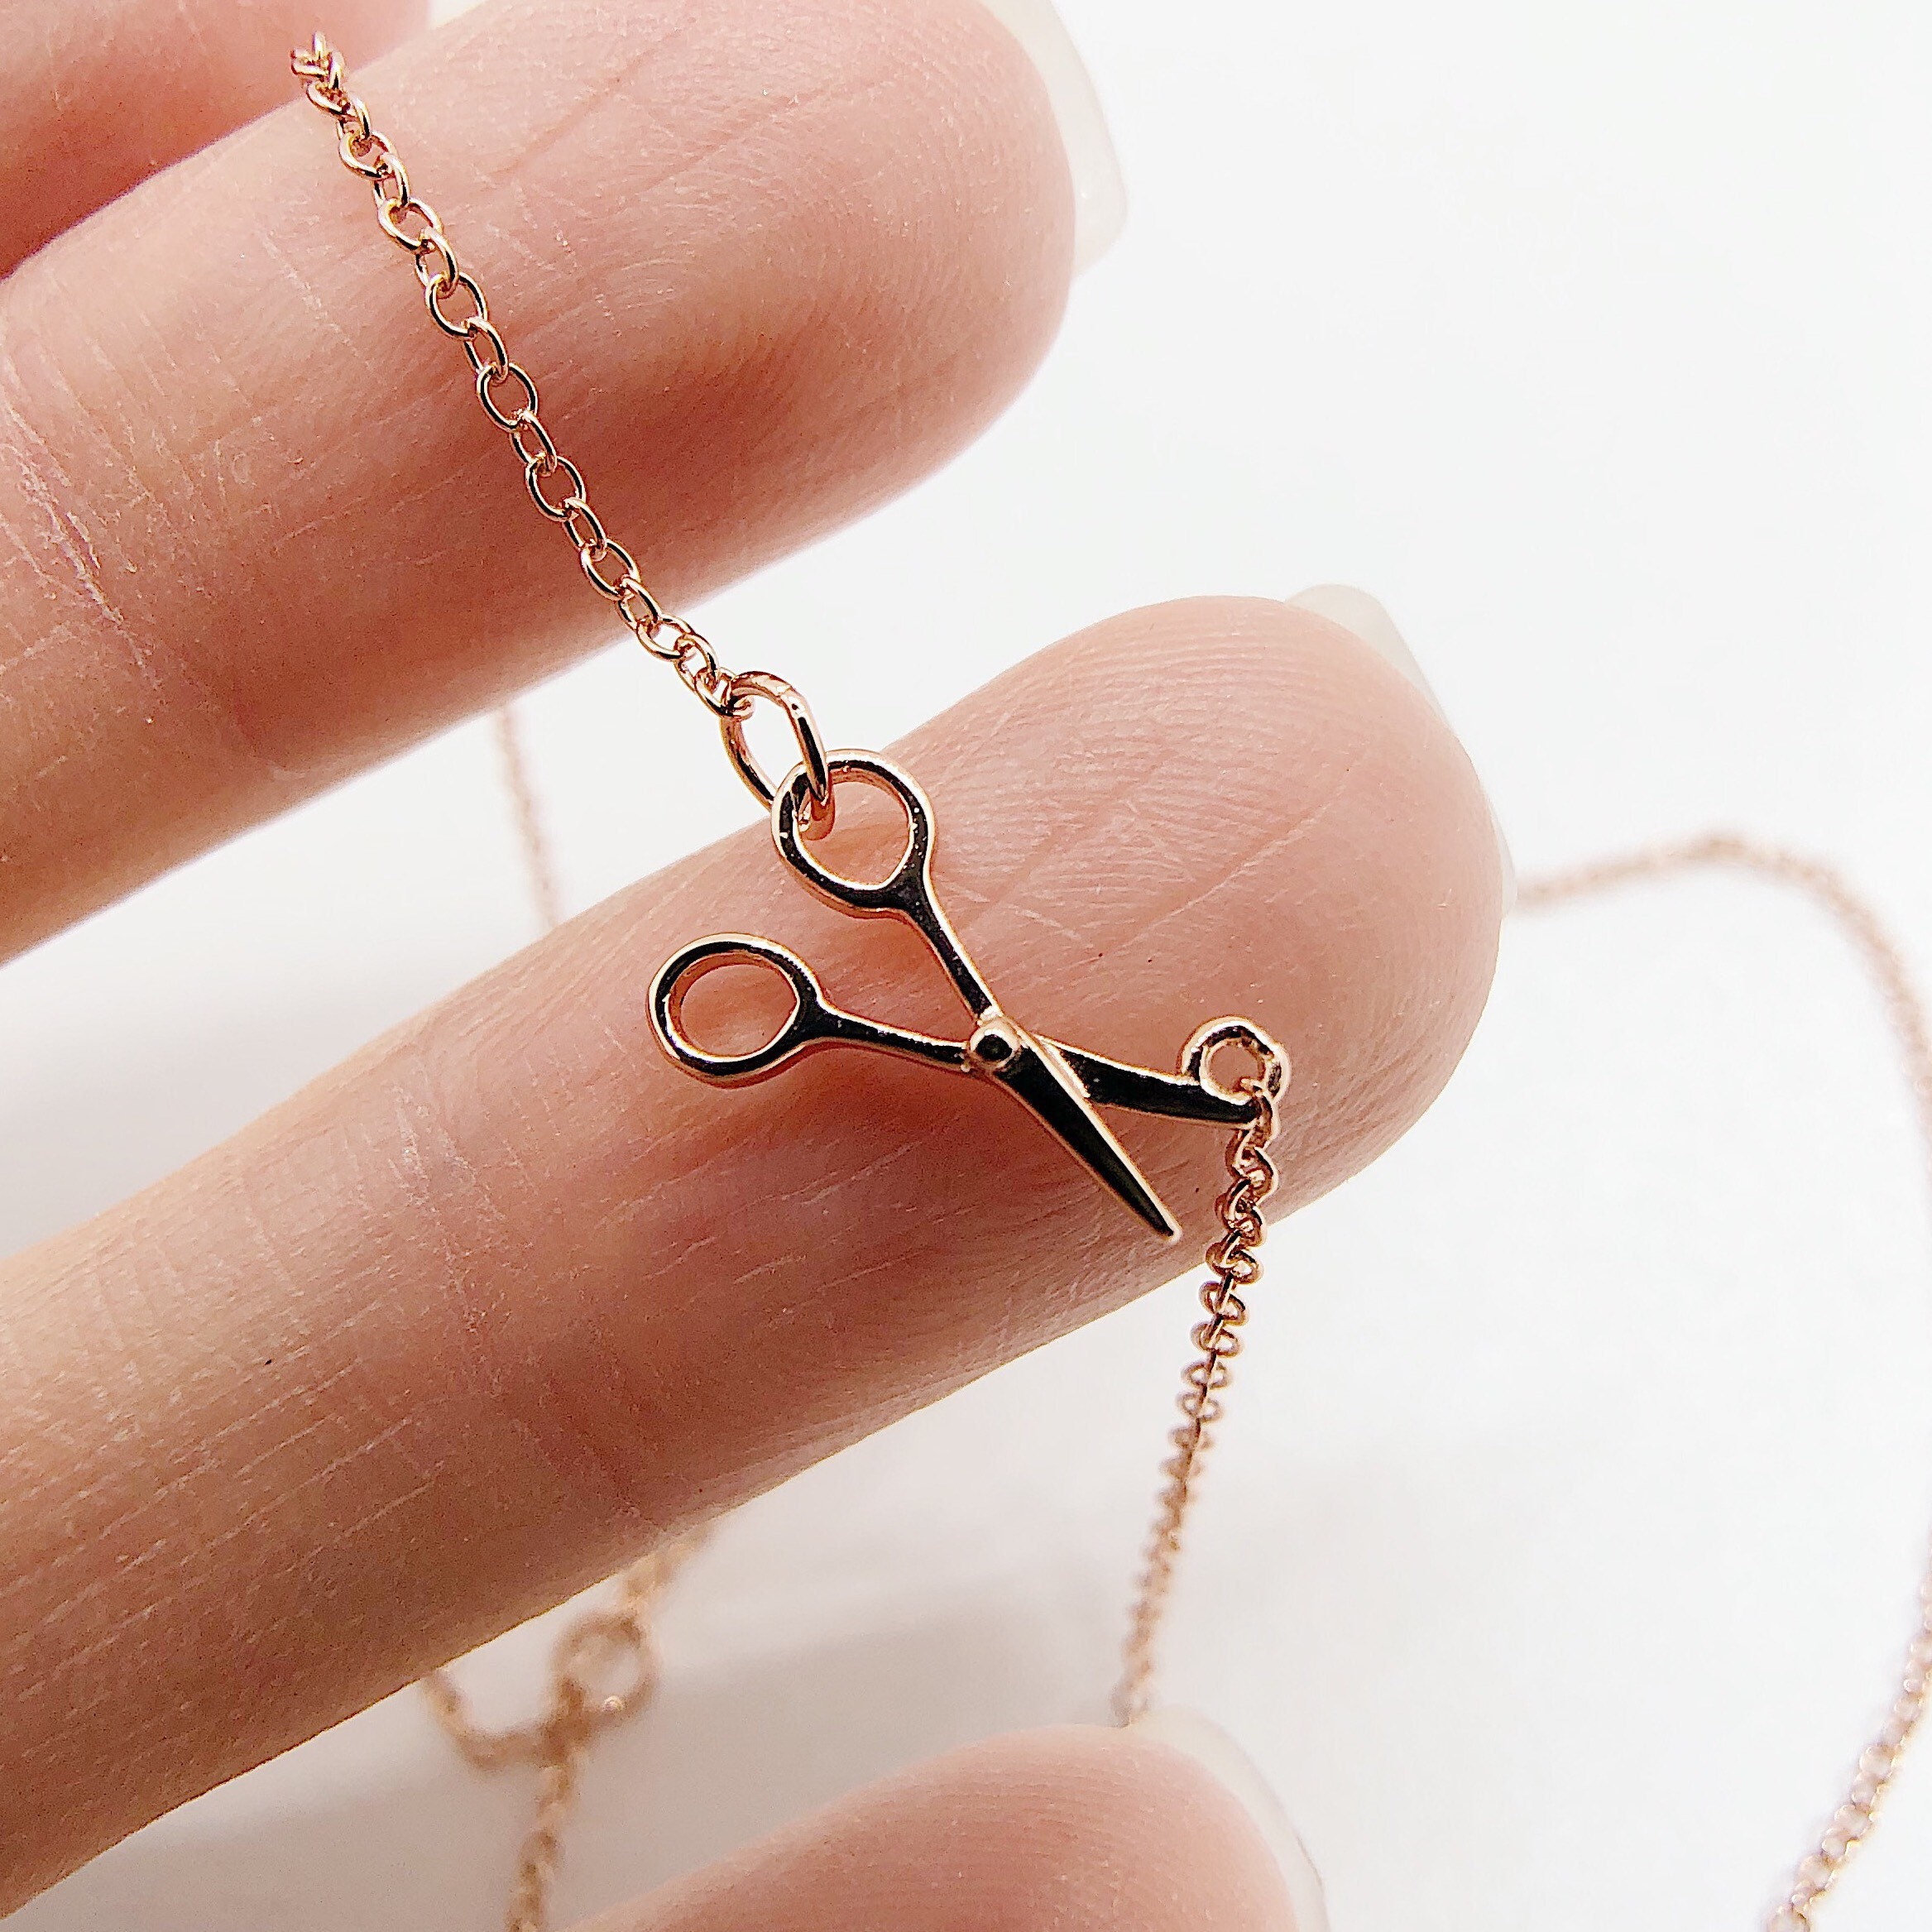 Dainty Hairdresser Necklace with Scissors Charm